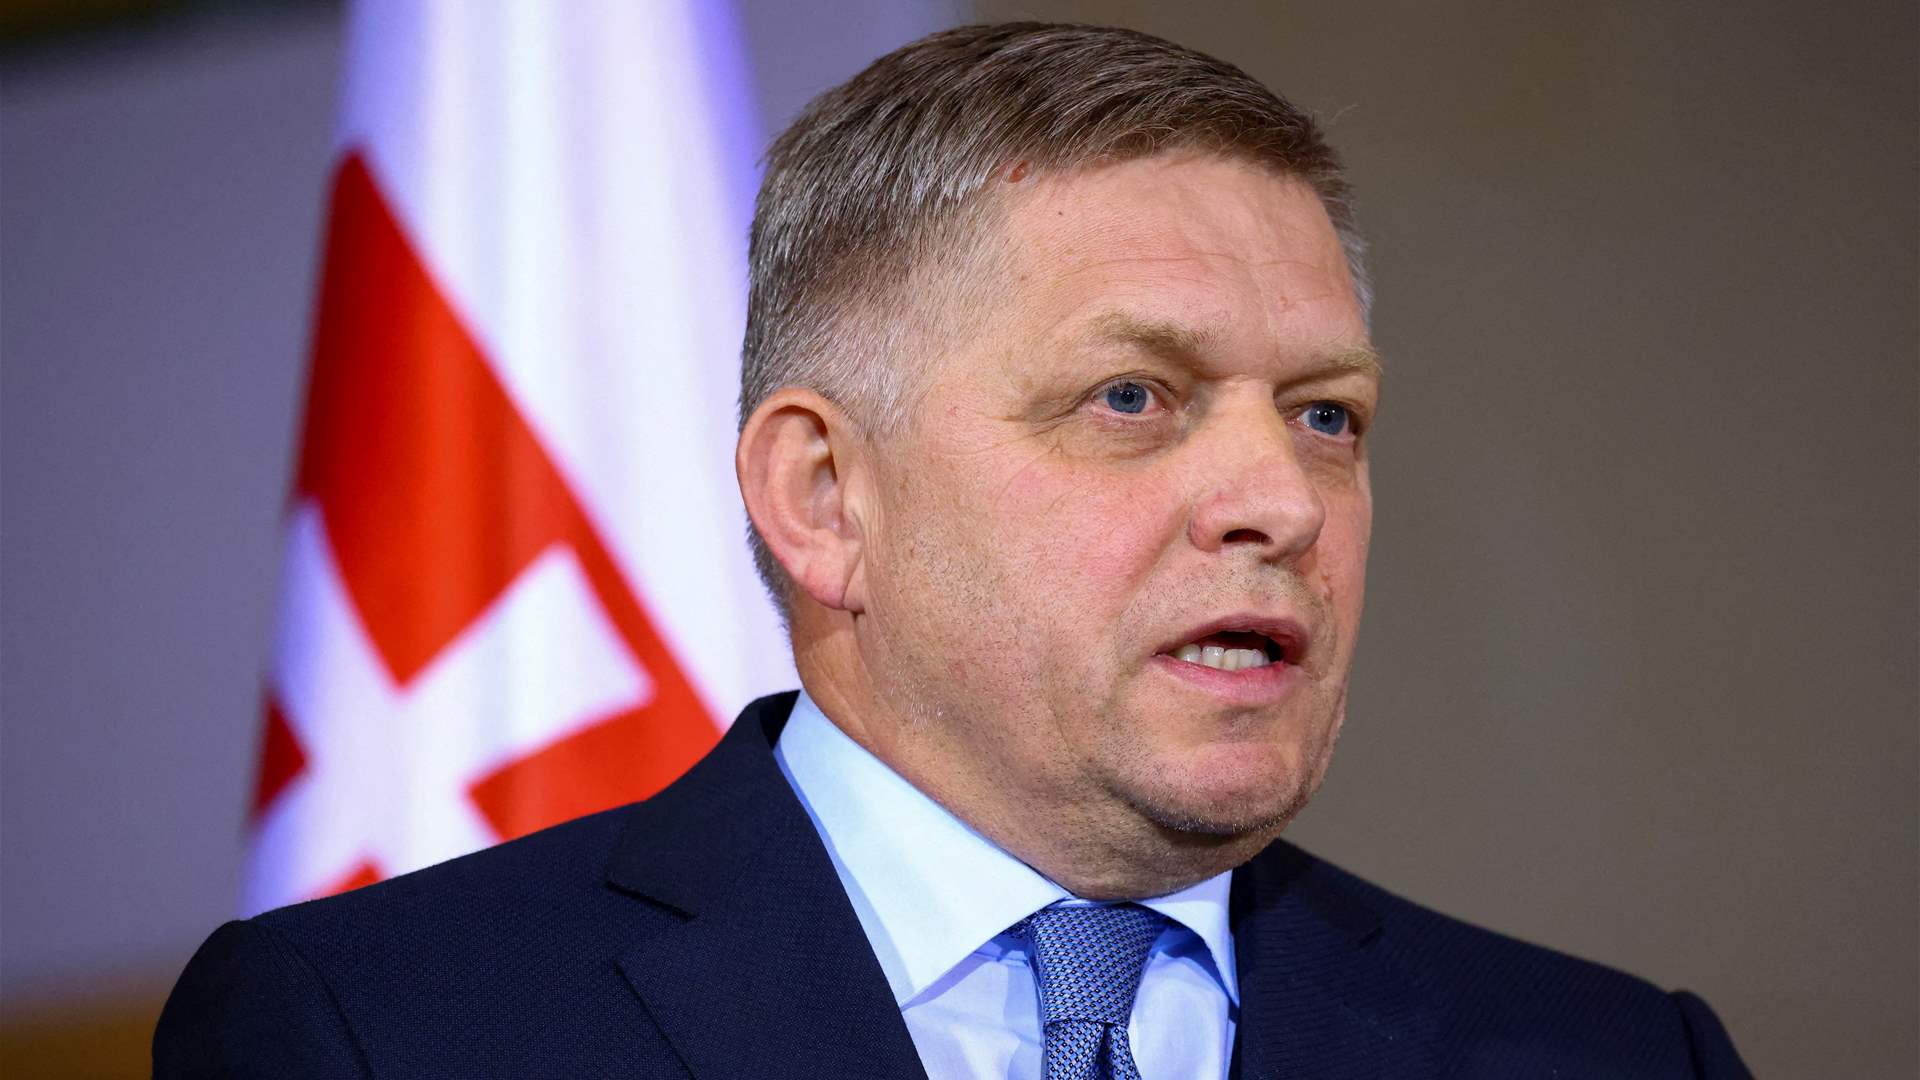 Slovak Defense Minister describes attack on the Prime Minister as a &#39;political assault&#39;